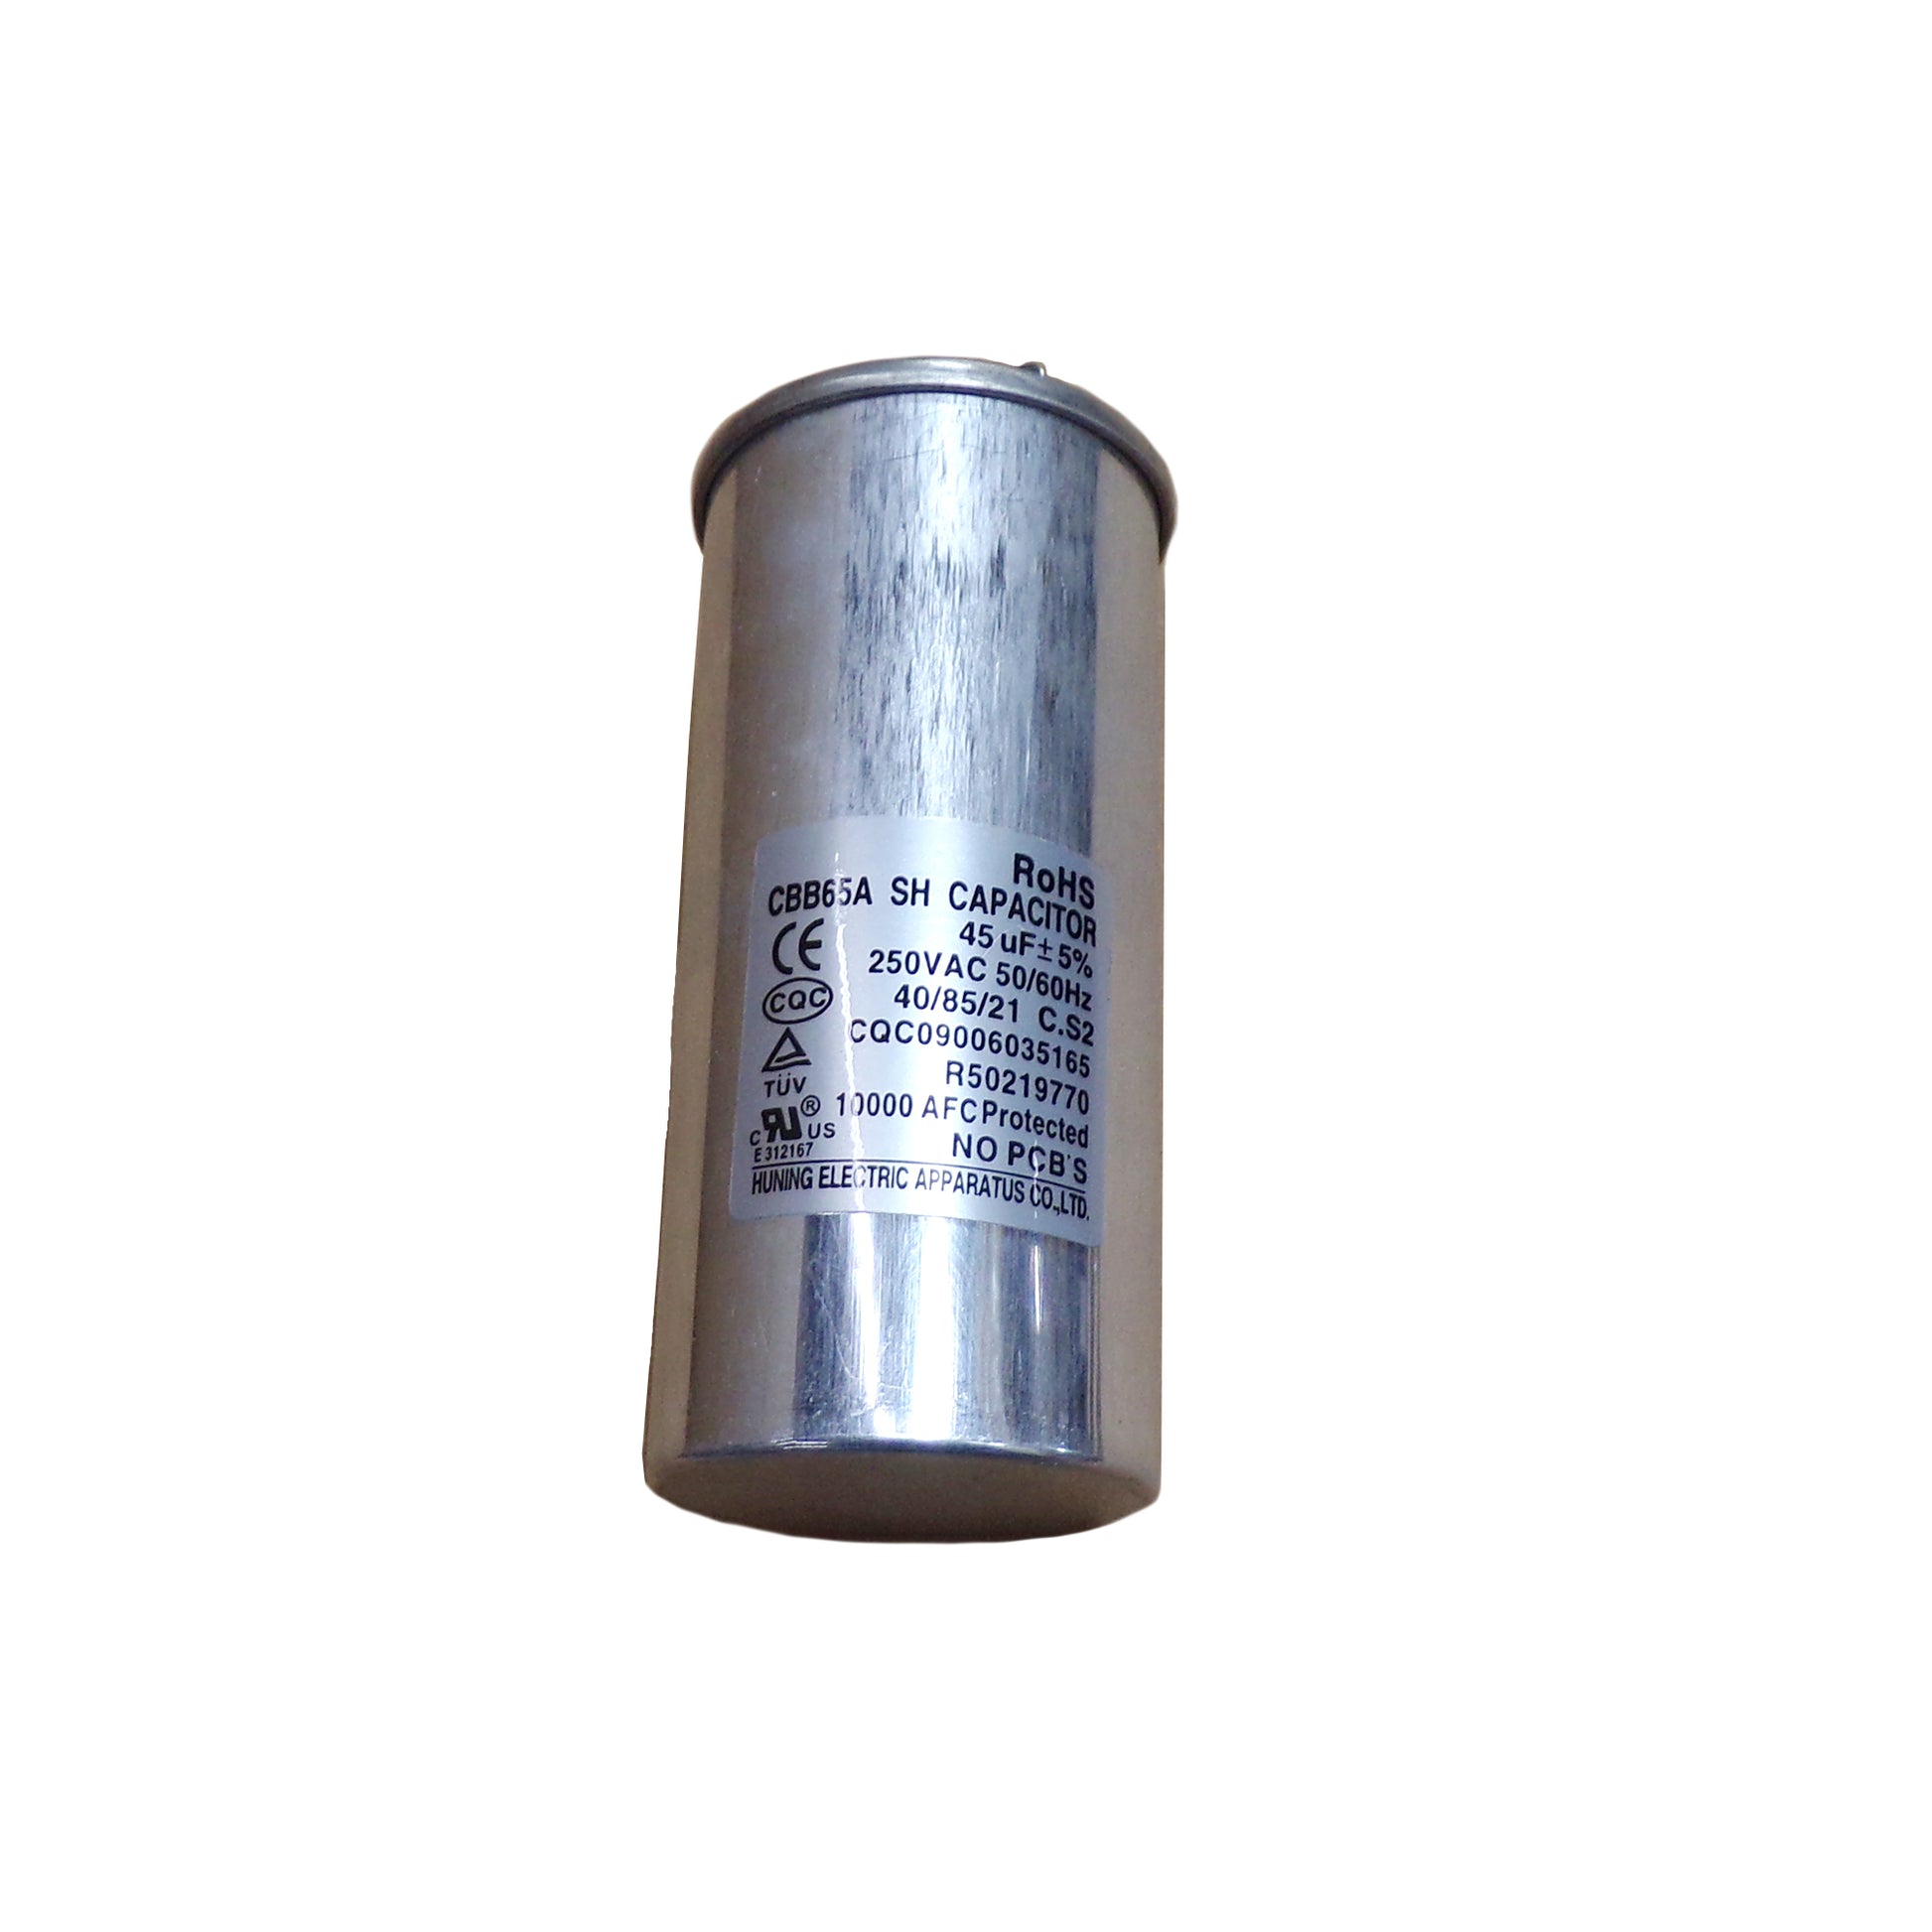 Compressor Capacitor for XD-85LH Dehumidifier